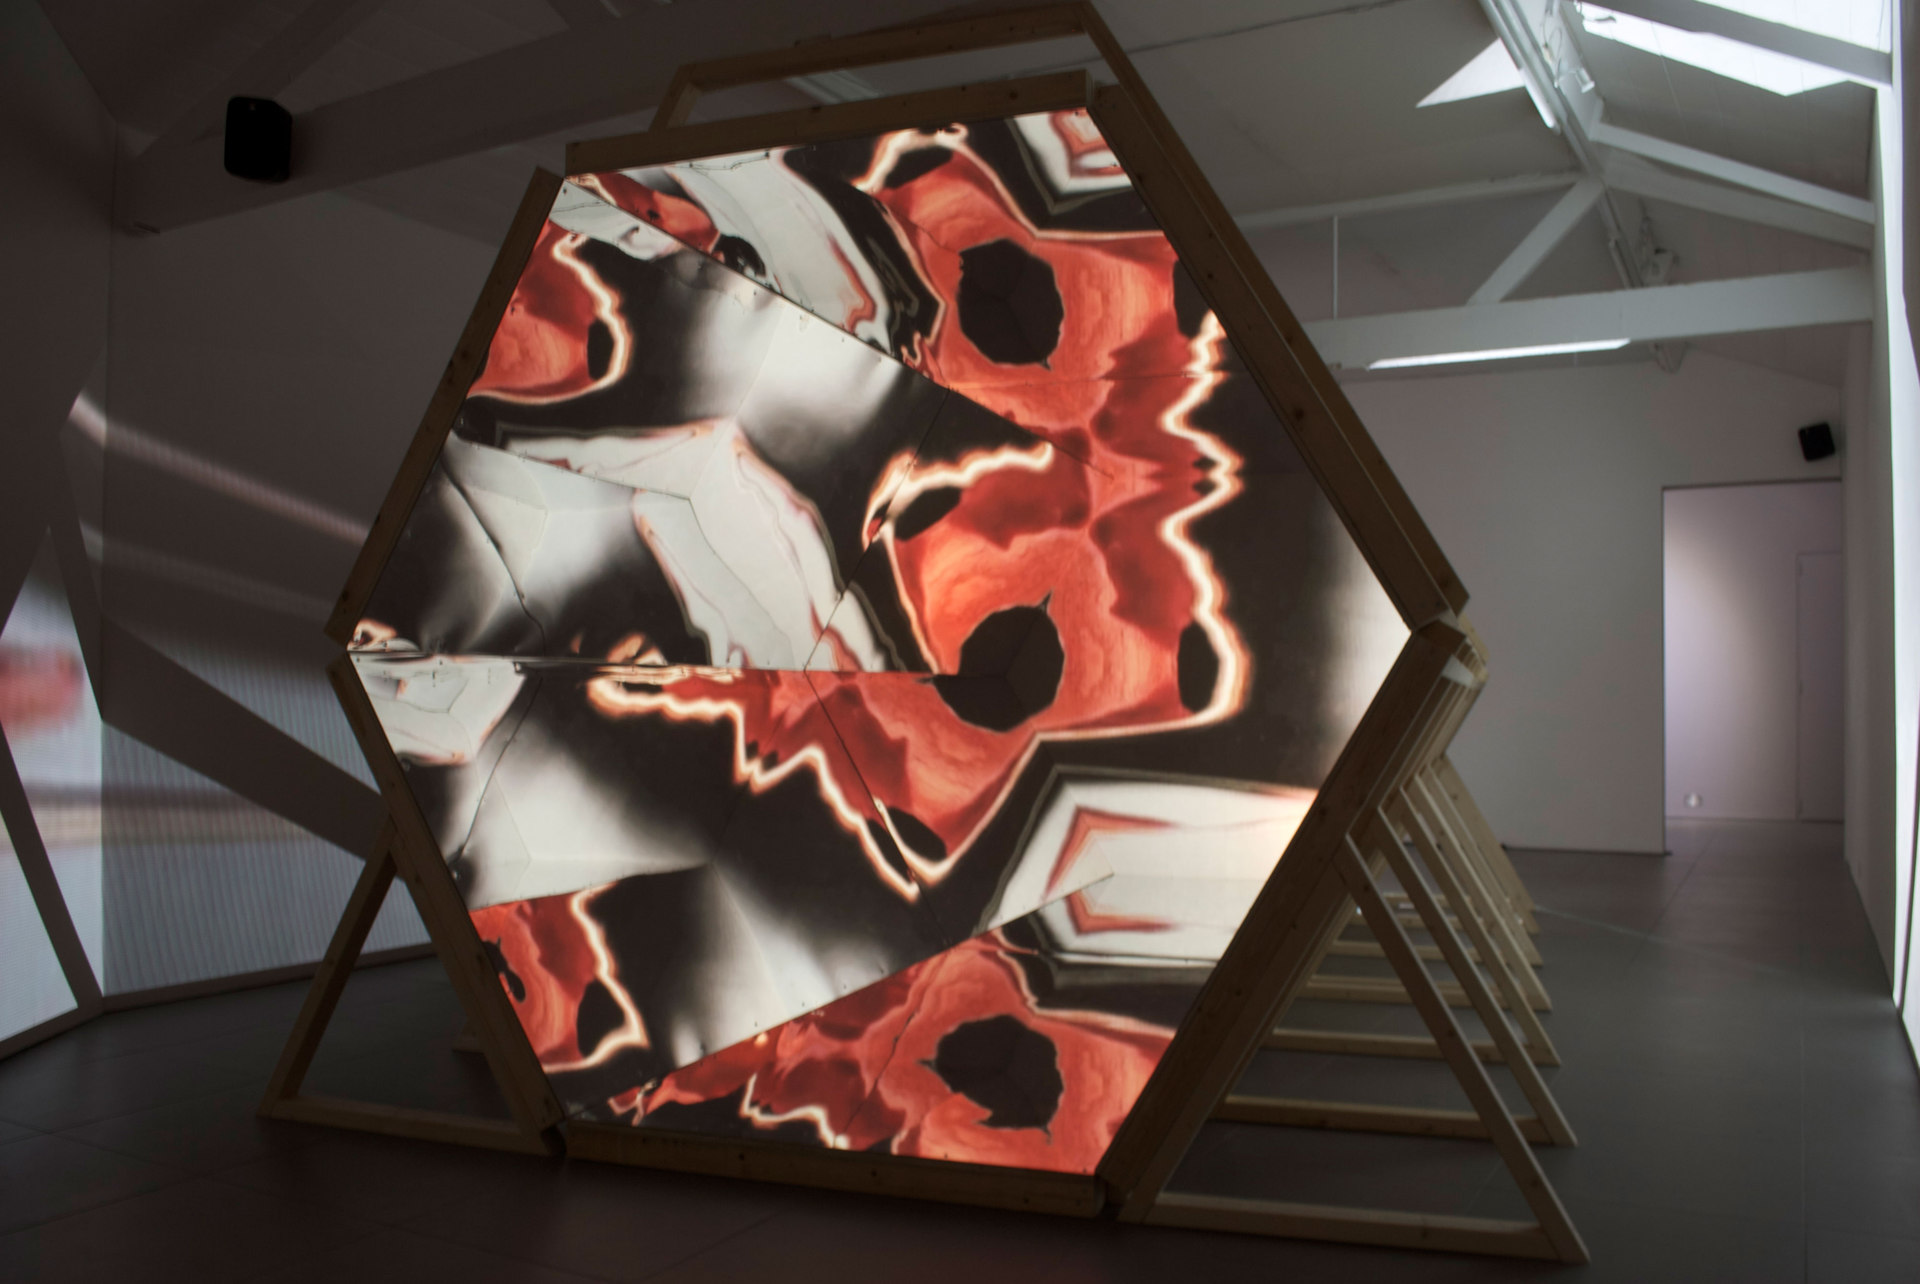 Laura Buckley, Fata Morgana, 2012, mixed media with 1/3 edition digital video, projection, duration 8:18 min, (l. 480 x w. 290 x h. 242 cm), Cell Project Space